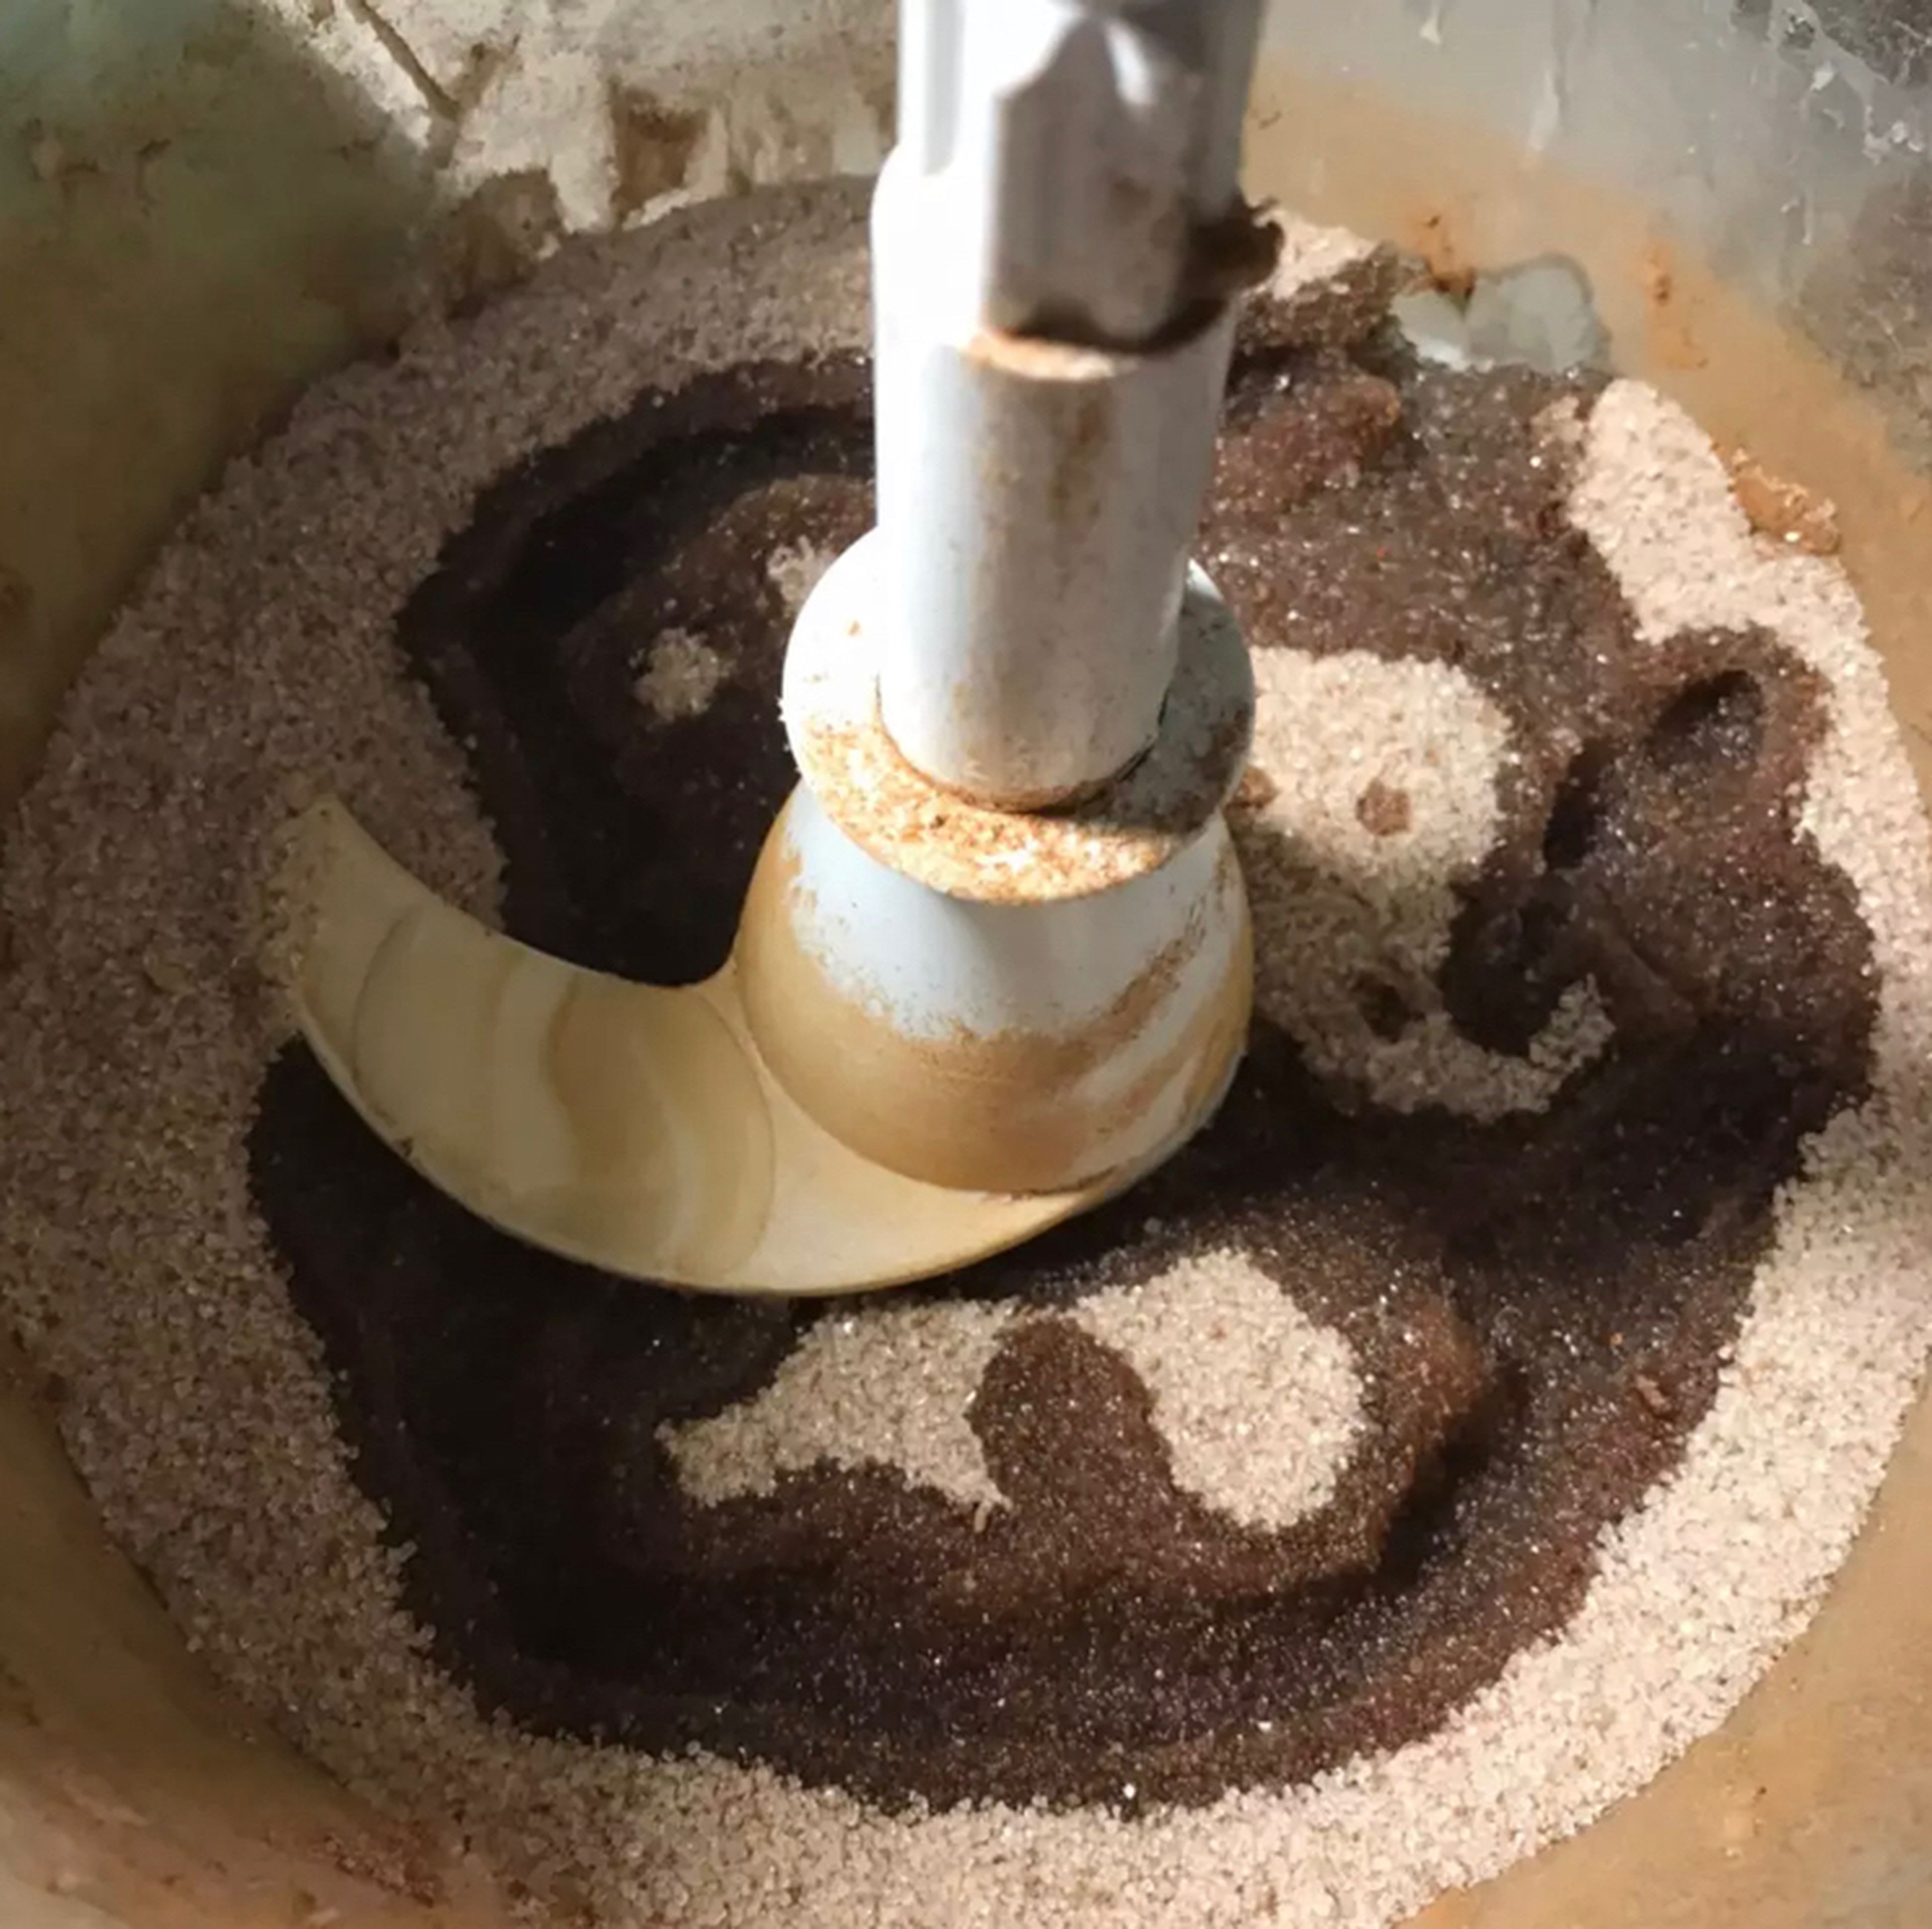 Mix the remaining powdered (1 cup) sugar, cinnamon powder and remaining 1/2 cup oil and 1/2 cup flour. Add vanilla, nutmeg and butter and mix. Can be done by food processor.